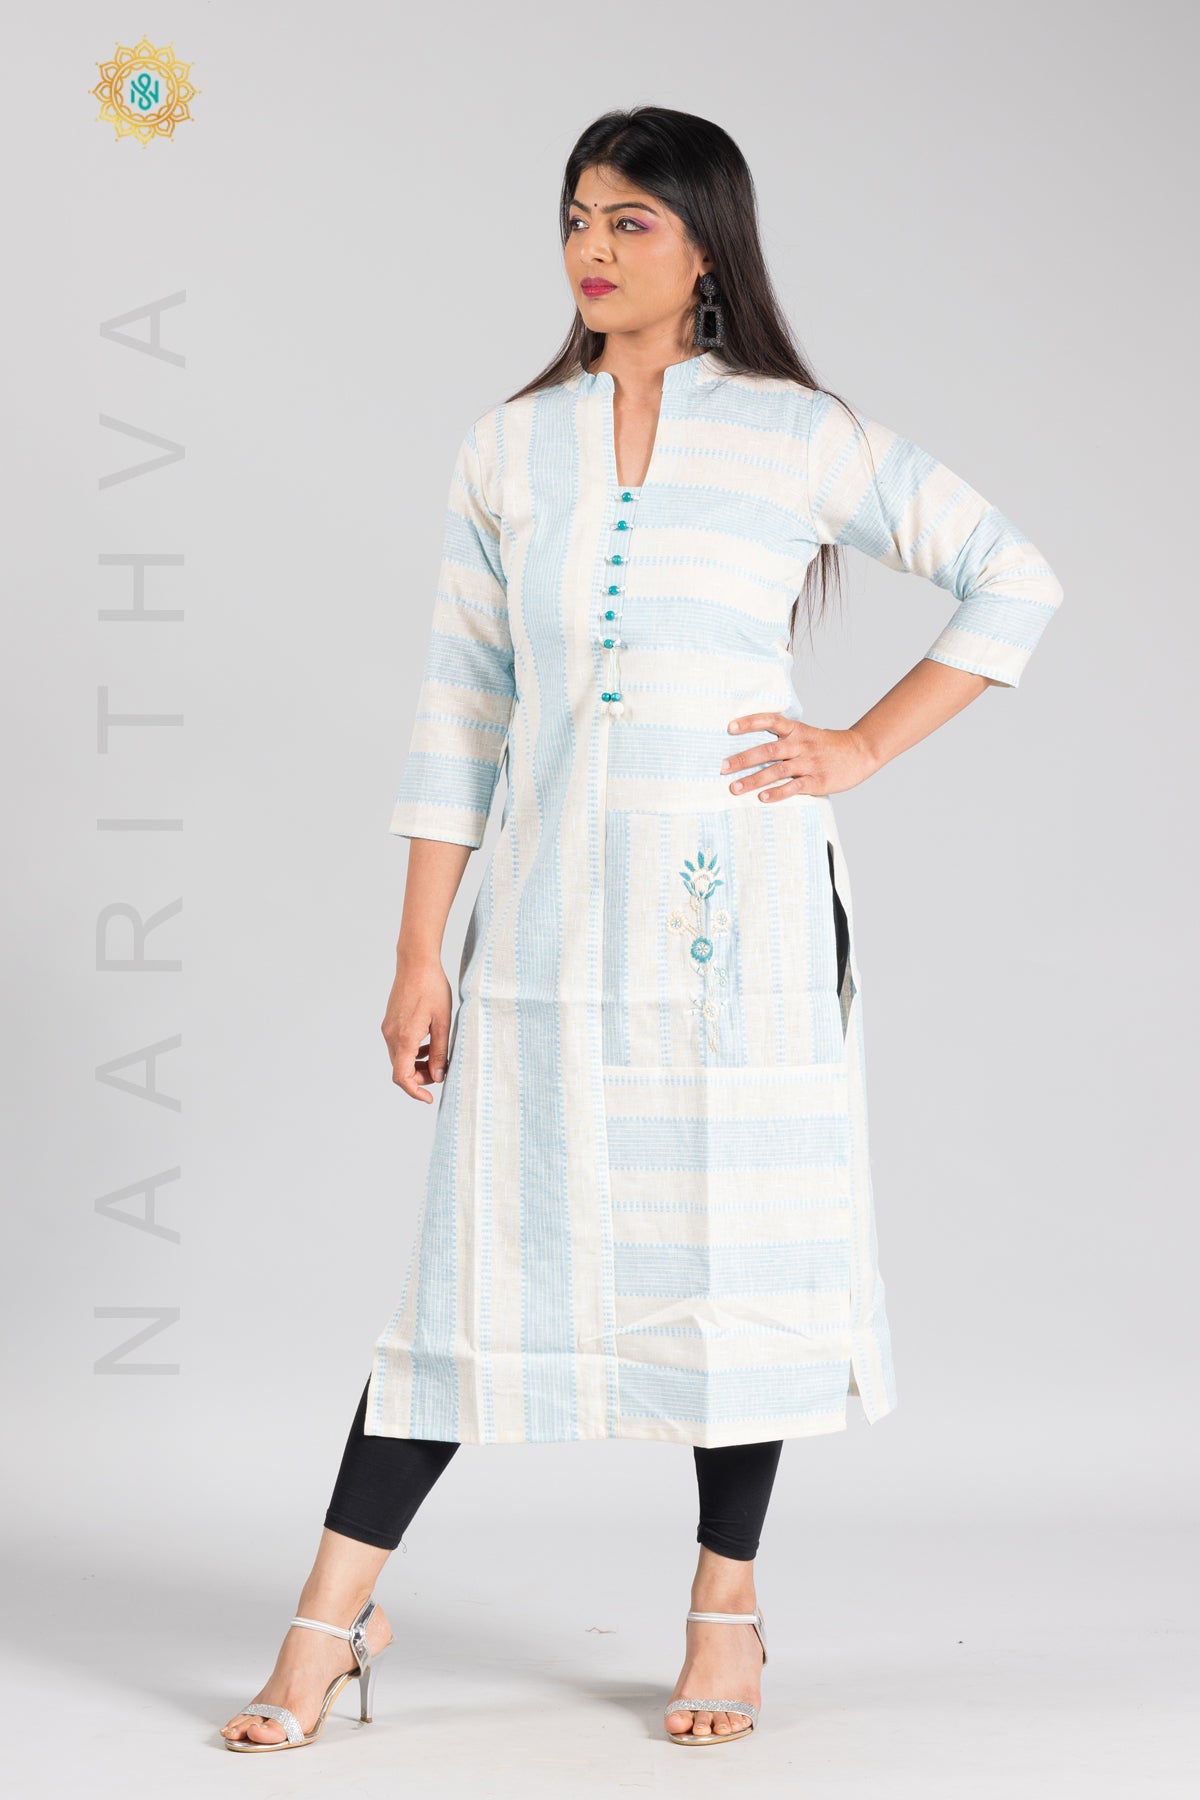 WHITE & BLUE - COTTON STRAIGHT CUT CASUAL KURTI WITH THREAD EMBROIDERY